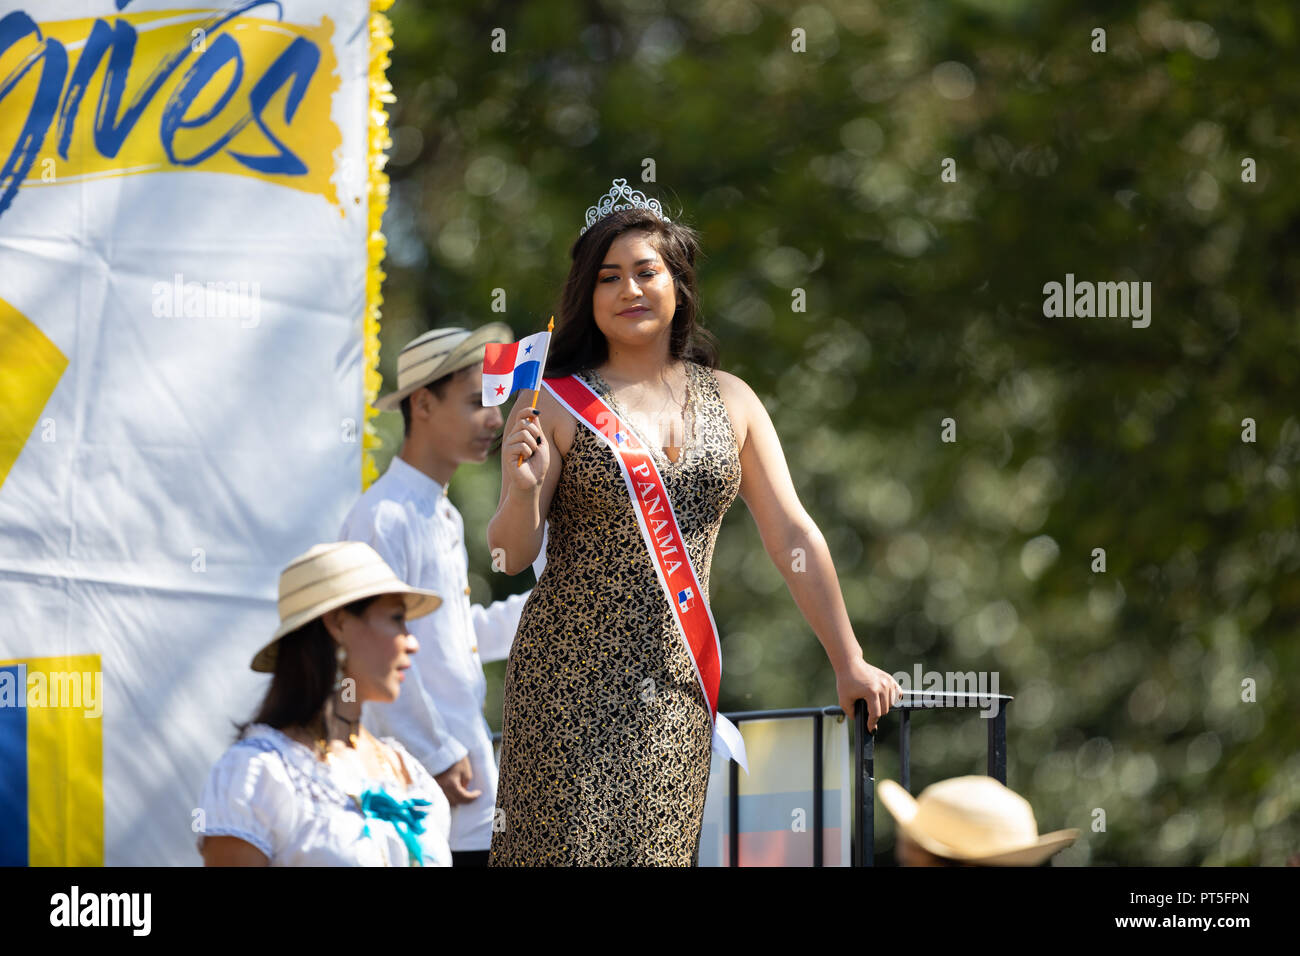 Washington, D.C., USA - September 29, 2018: The Fiesta DC Parade, Panamanian beauty queen Holding the panamanian flag going on top of a float down the Stock Photo